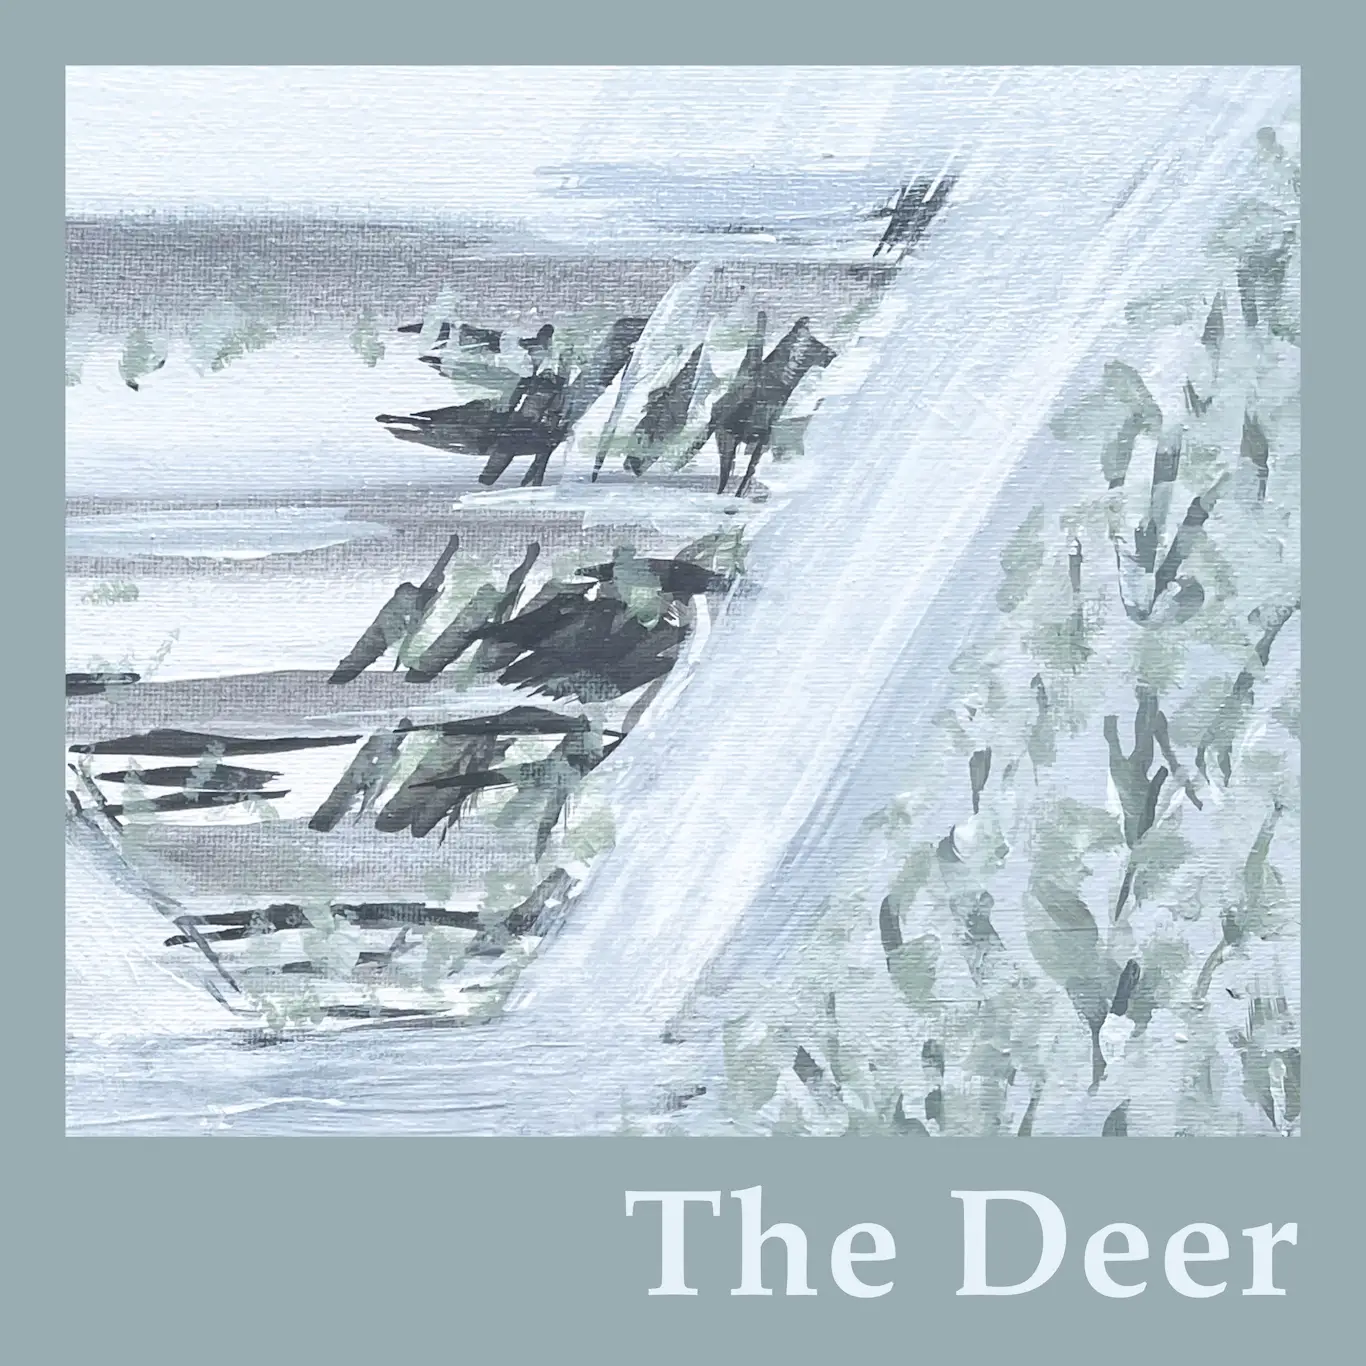 SELAH BRODERICK shares ‘The Deer’ from the forthcoming album ‘Moon in the Monastery’